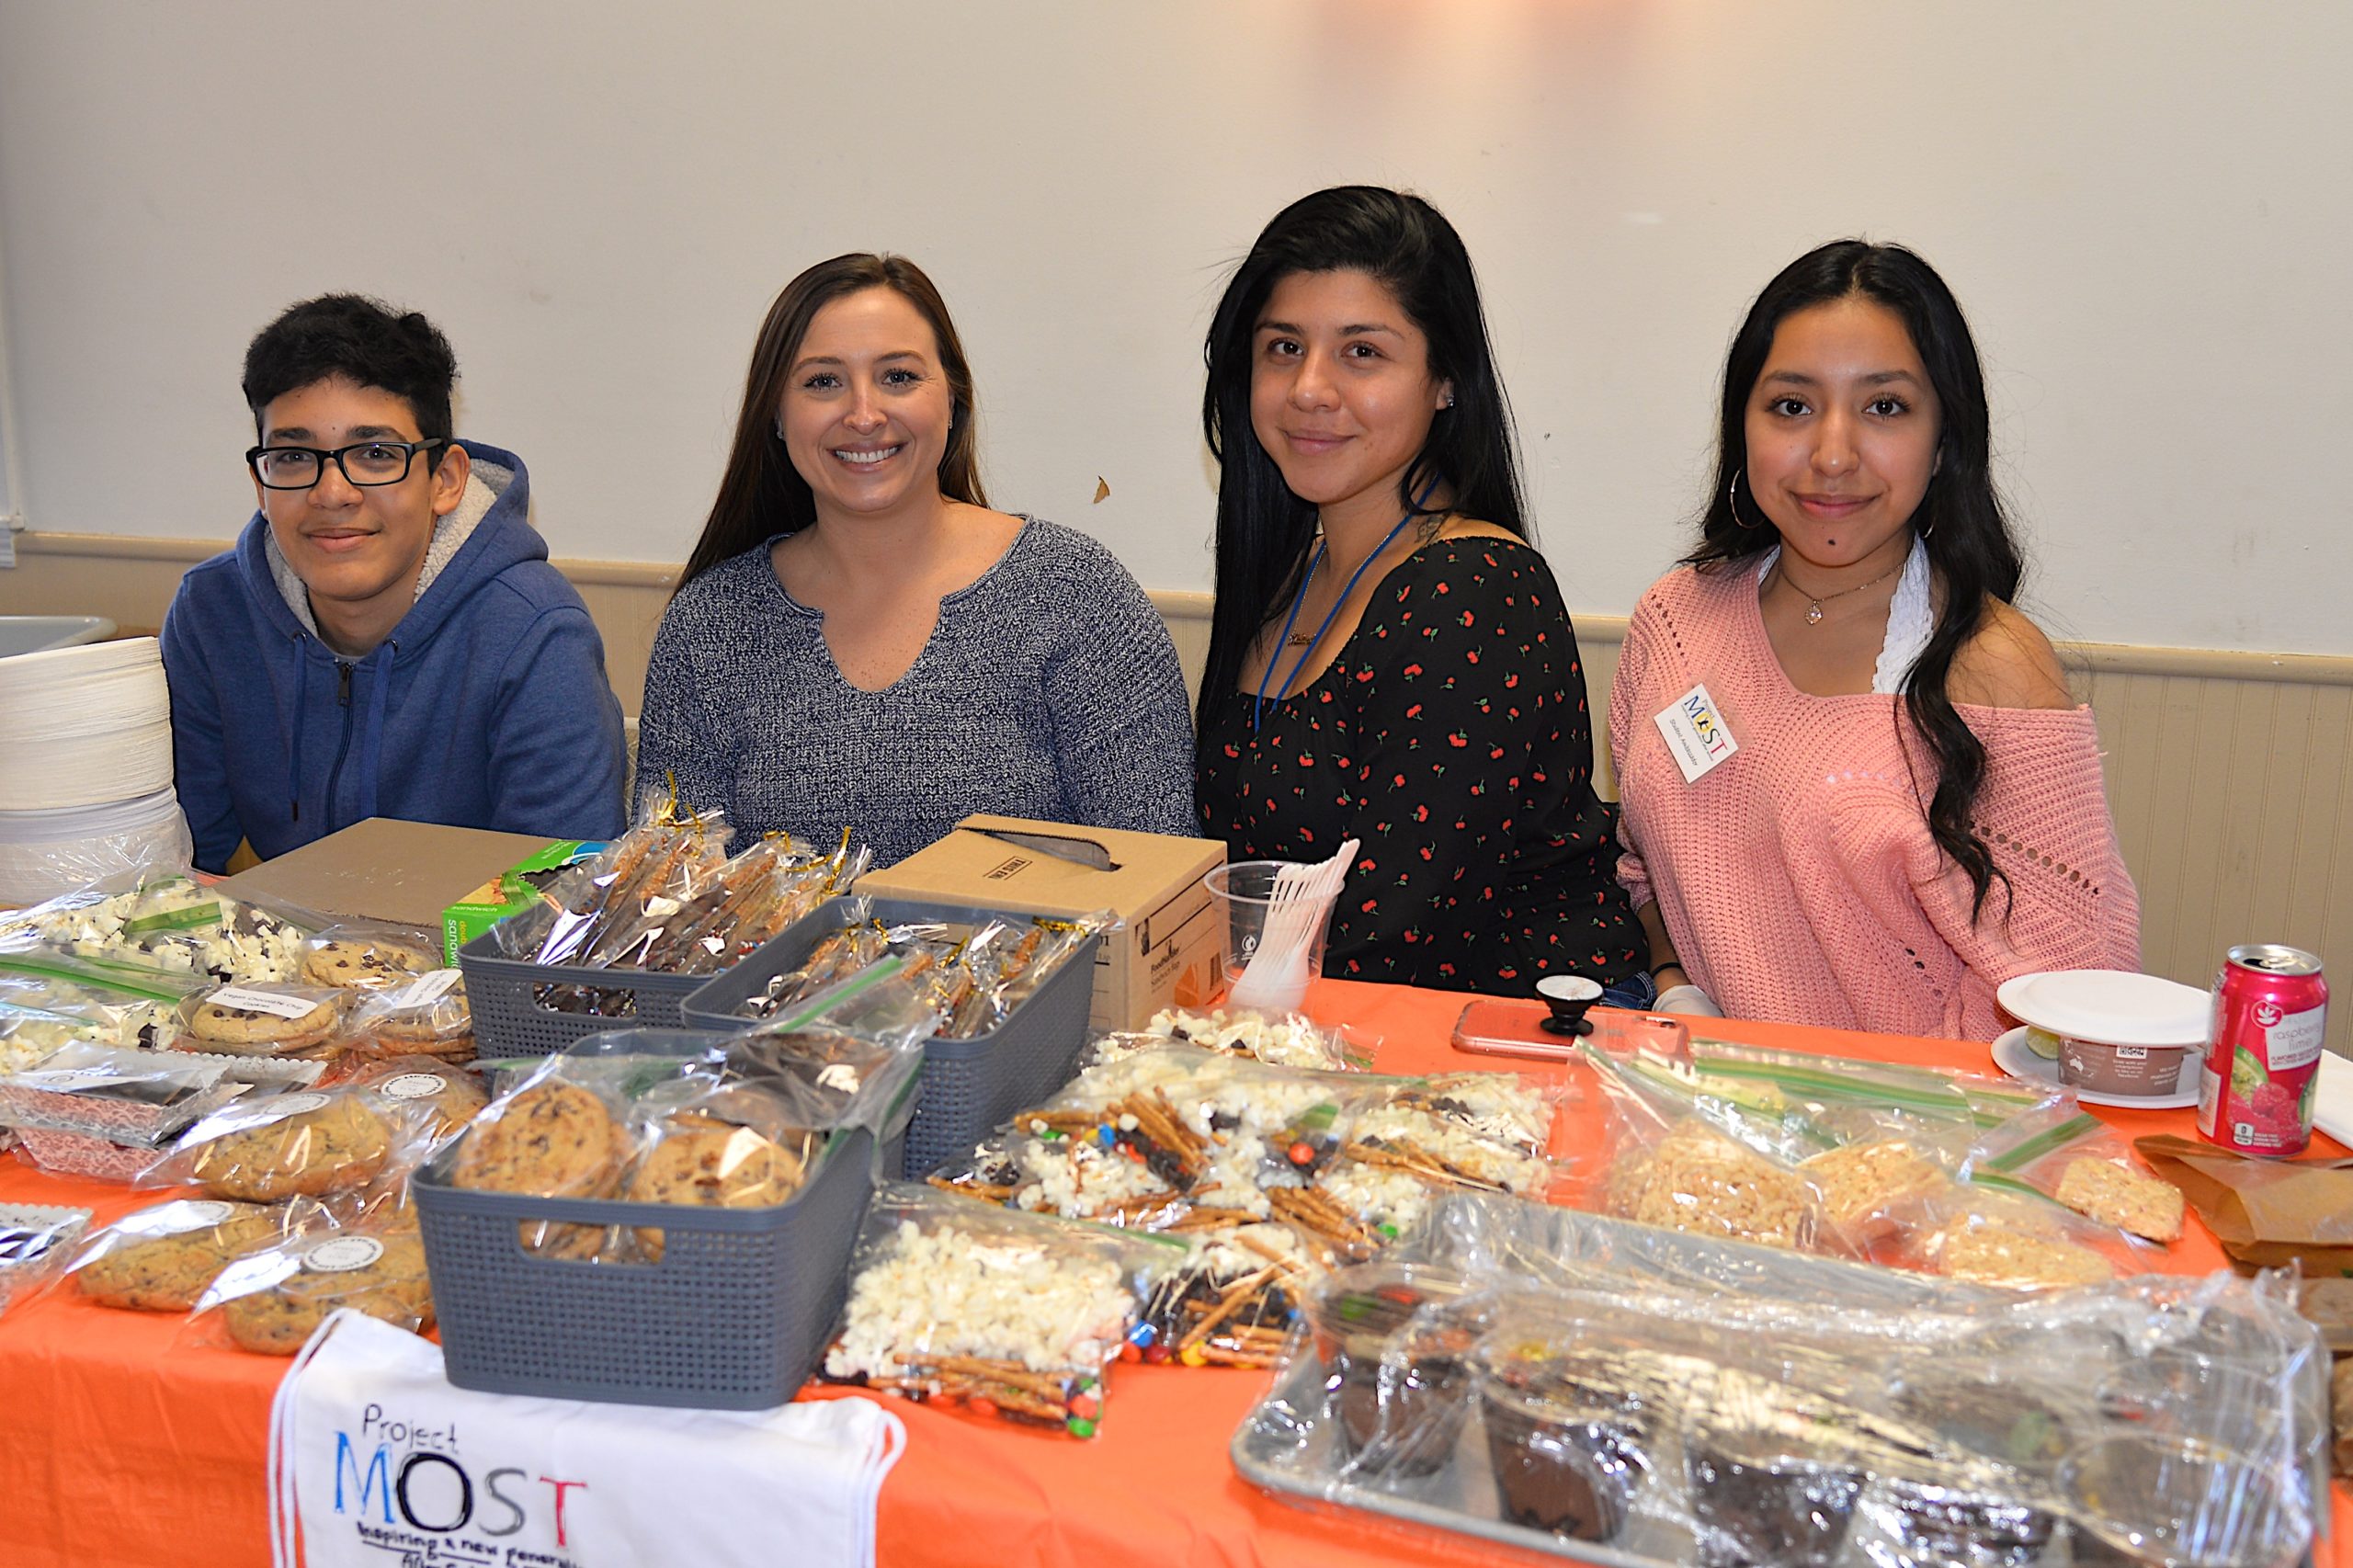 Empty Bowls, a fundraiser for Project Most, with soups from local chefs and restaurants took place at the Amagansett American Legion hall on Sunday. Volunteering at the baked goods table, from left, Aaron Jimenez, Melissa Anderson, Malany Perez and Mariser Gallegos. KYRIL BROMLEY